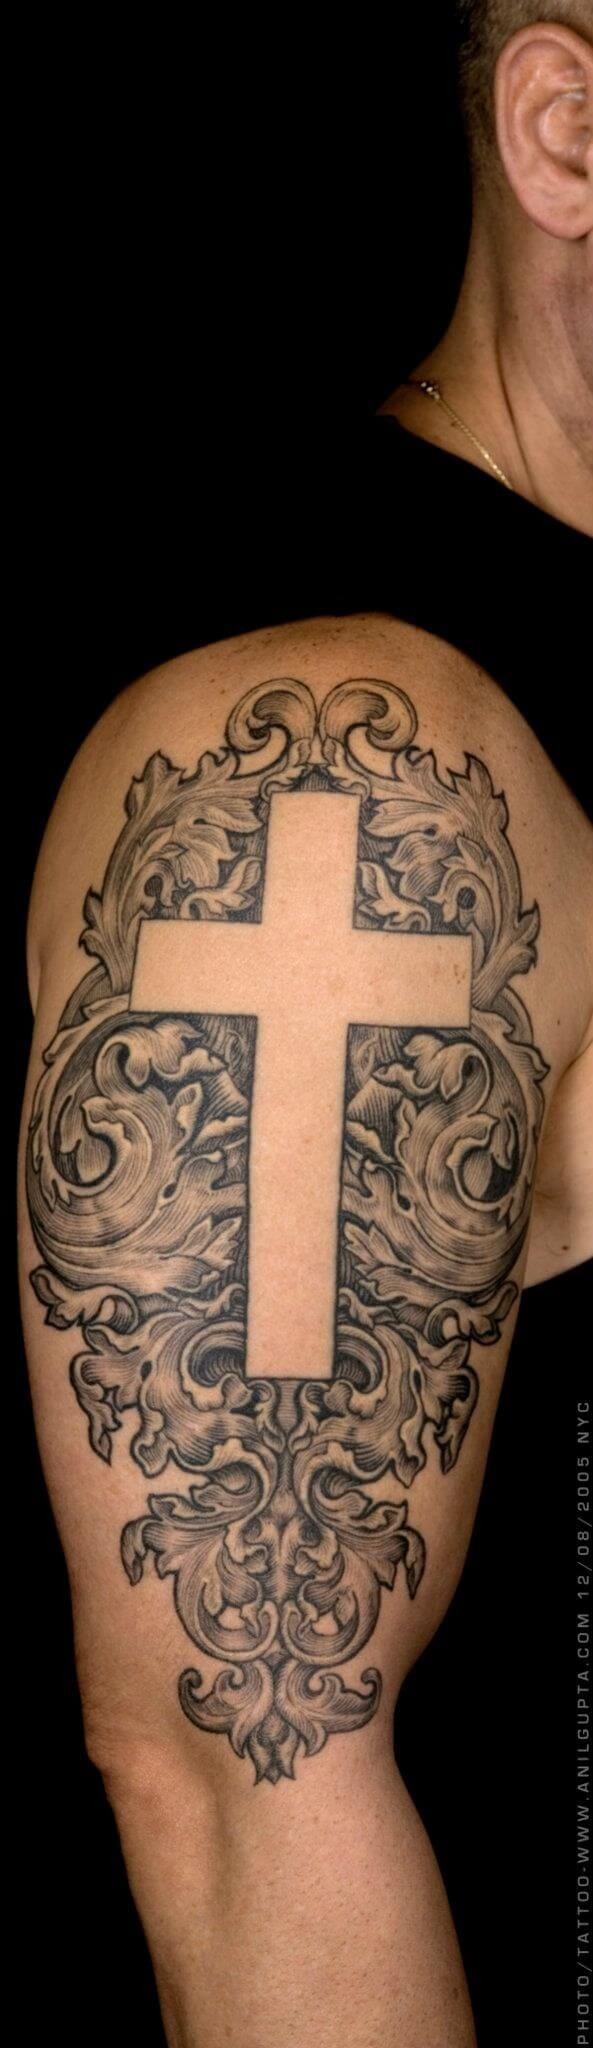 56 Best Cross Tattoos For Men Improb throughout sizing 593 X 2048